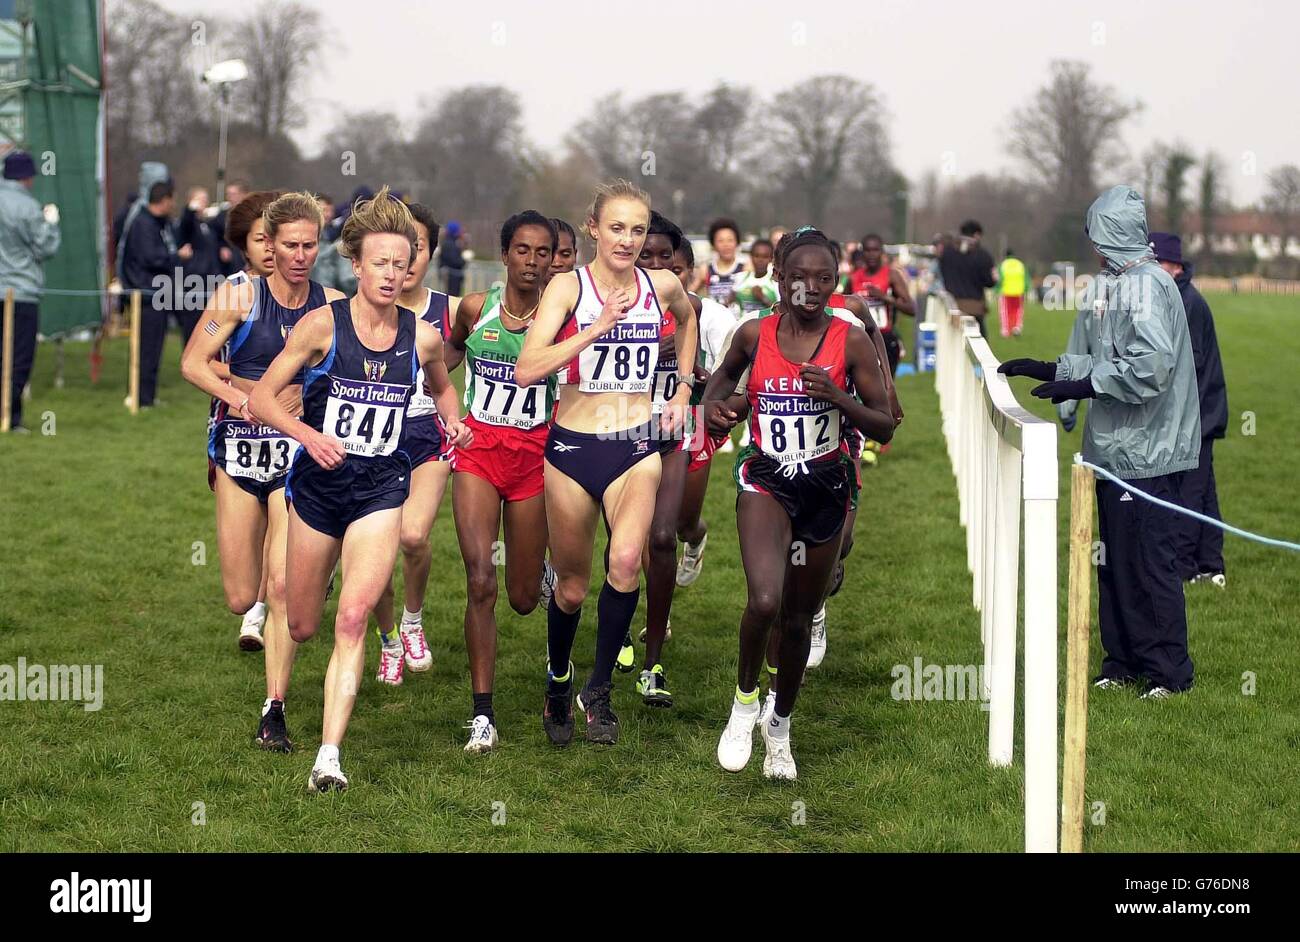 British athlete Paula Radcliffe (centre)) battles with American Deena Drossin (L) and and Kenyan Rose Cheruiyot (R) in the 30th IAAF World Cross-County Championship in Dublin. Radcliffe went on to successfully defend her title in a time of 26.55 with the American finishing nine seconds behind her in second place. Stock Photo